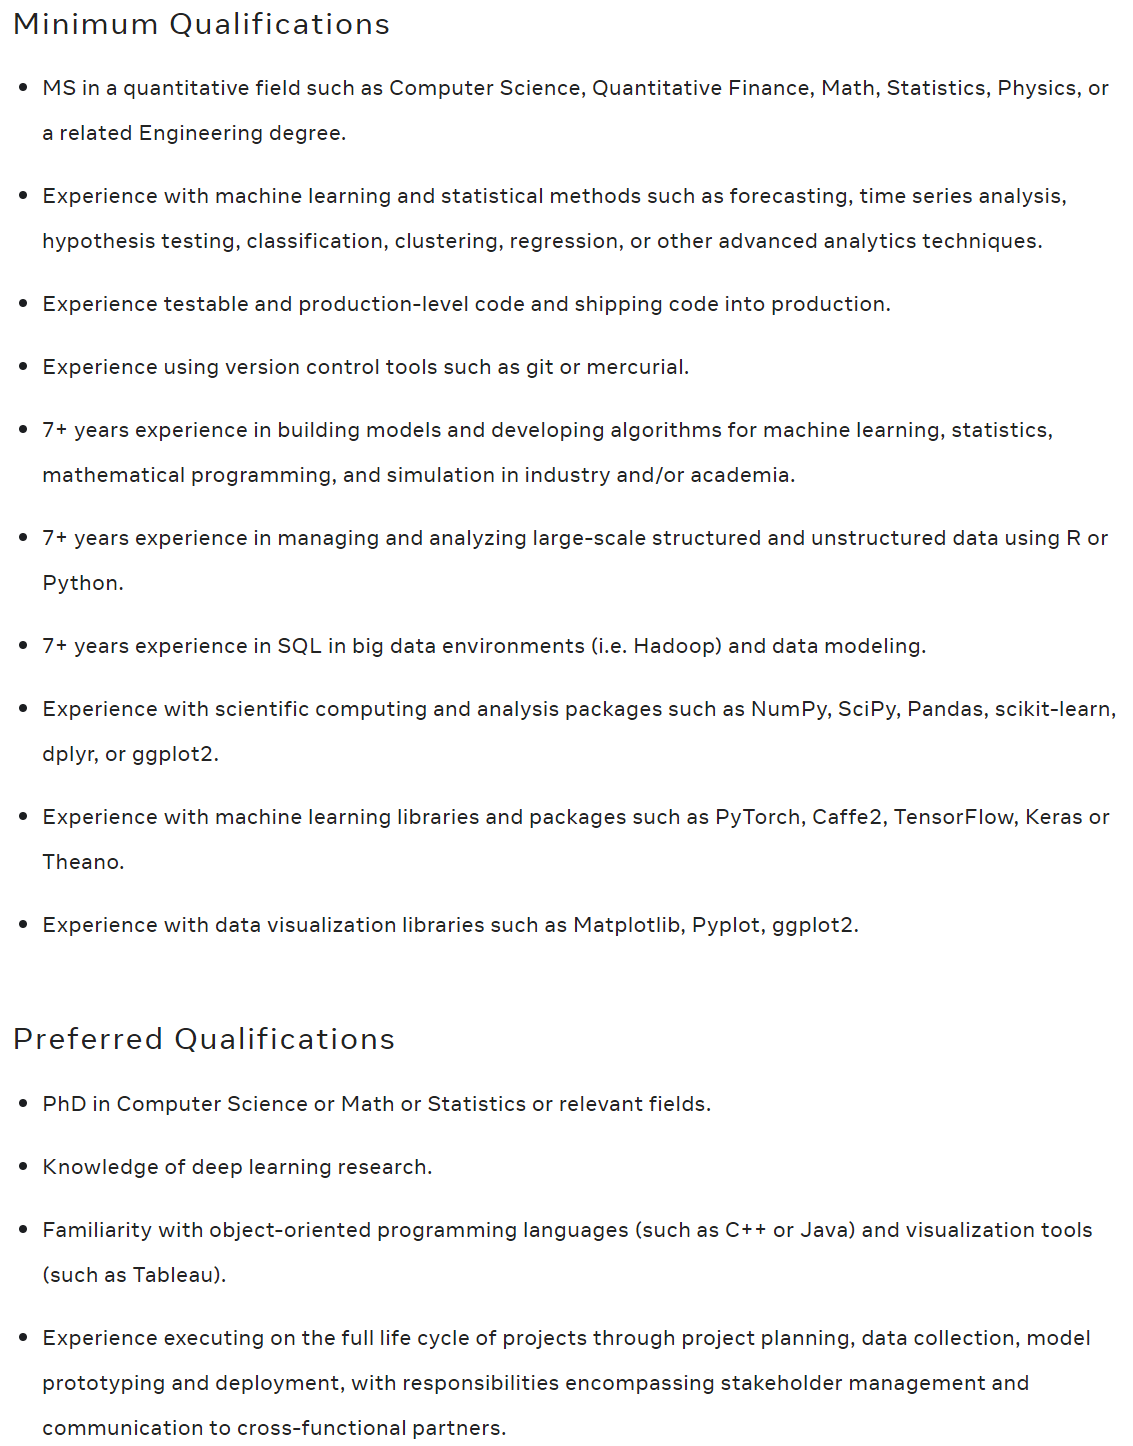 Minimum qualifications for a research data scientist at Facebook